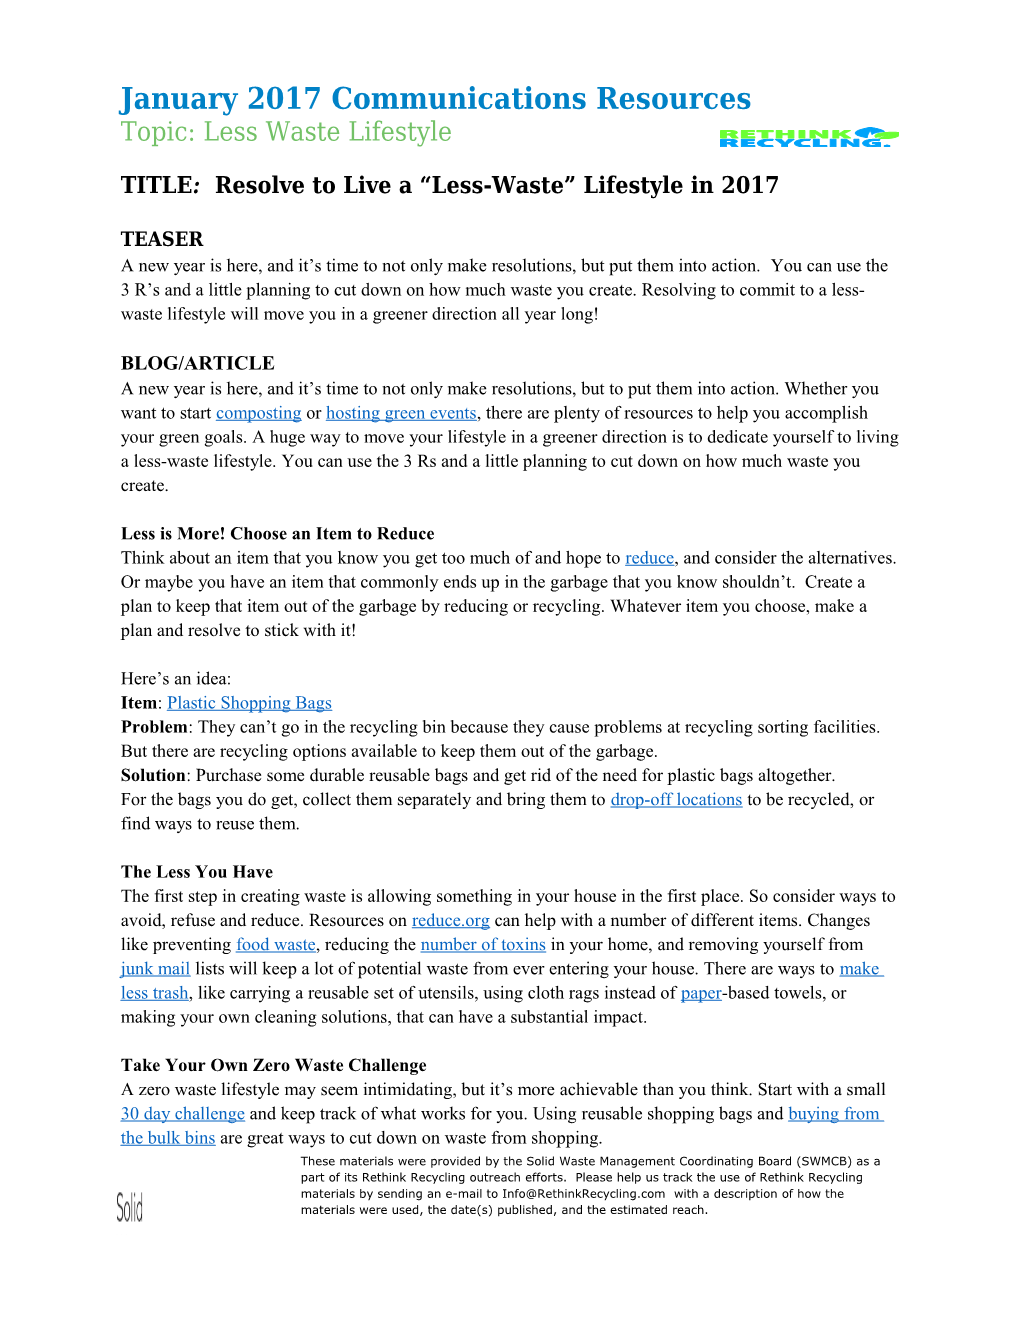 TITLE: Resolve to Live a Less-Waste Lifestyle in 2017